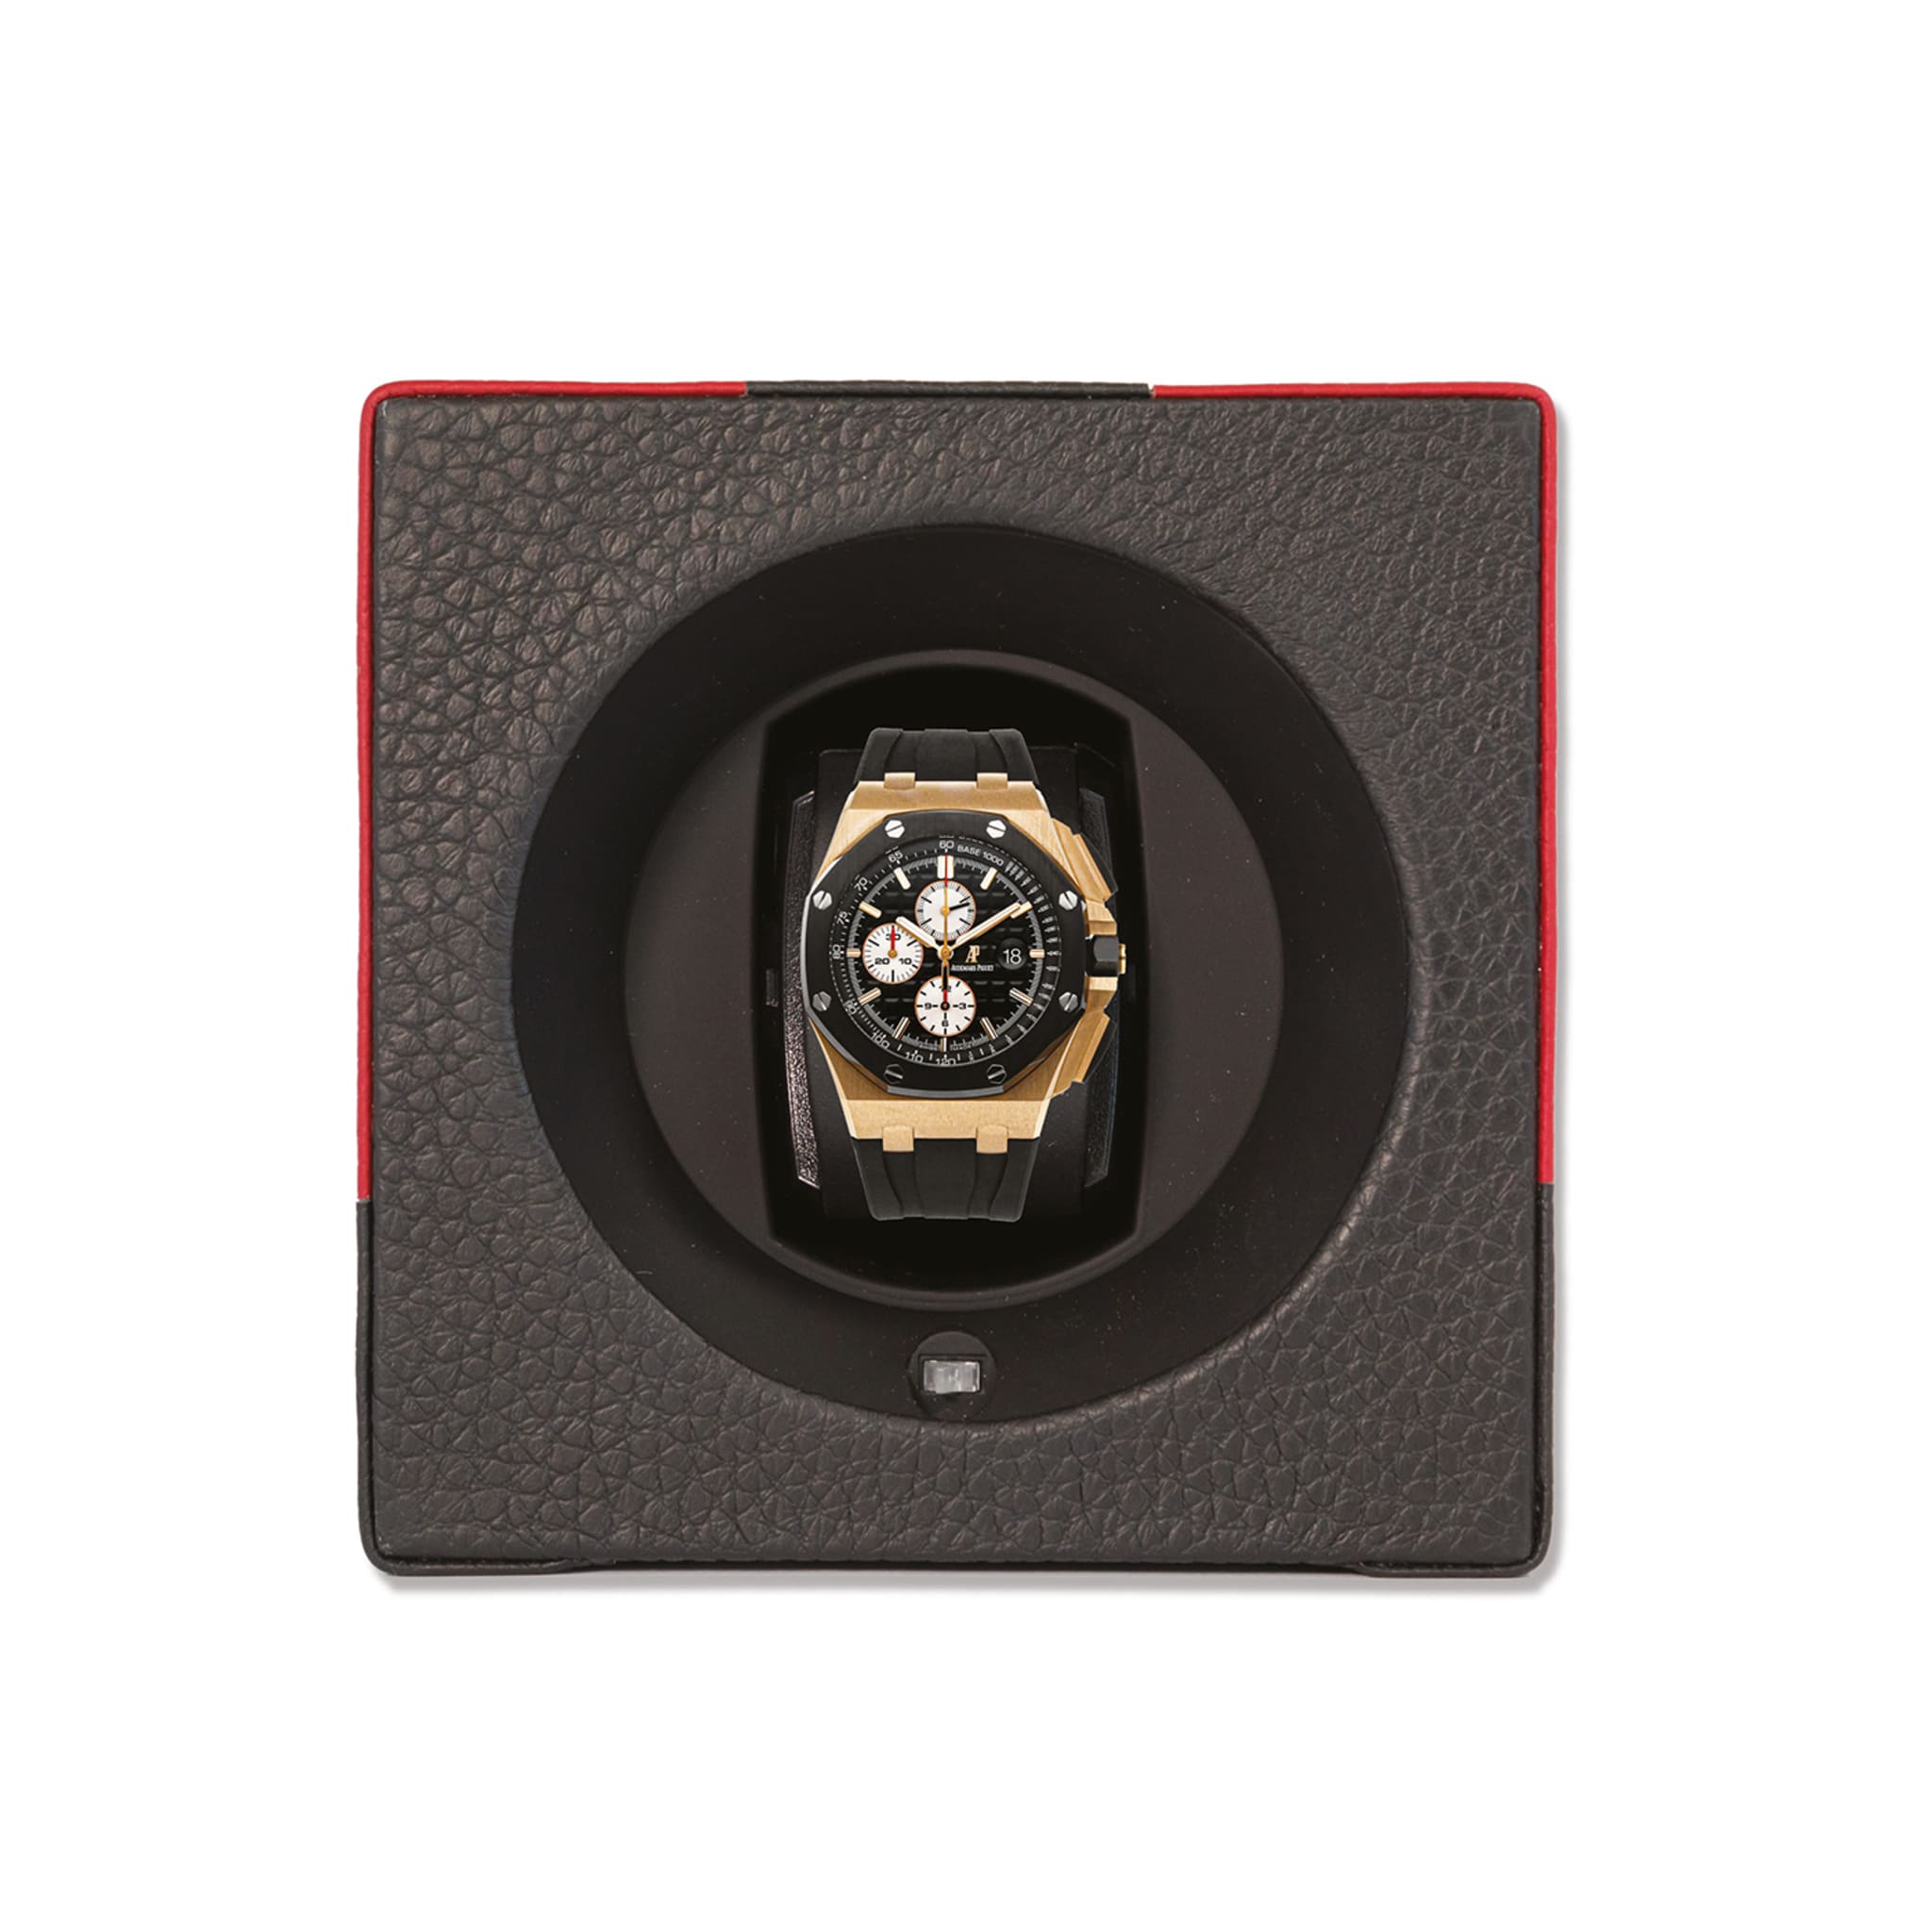 Pillow Red and Black Watch Winder - Alternative view 3